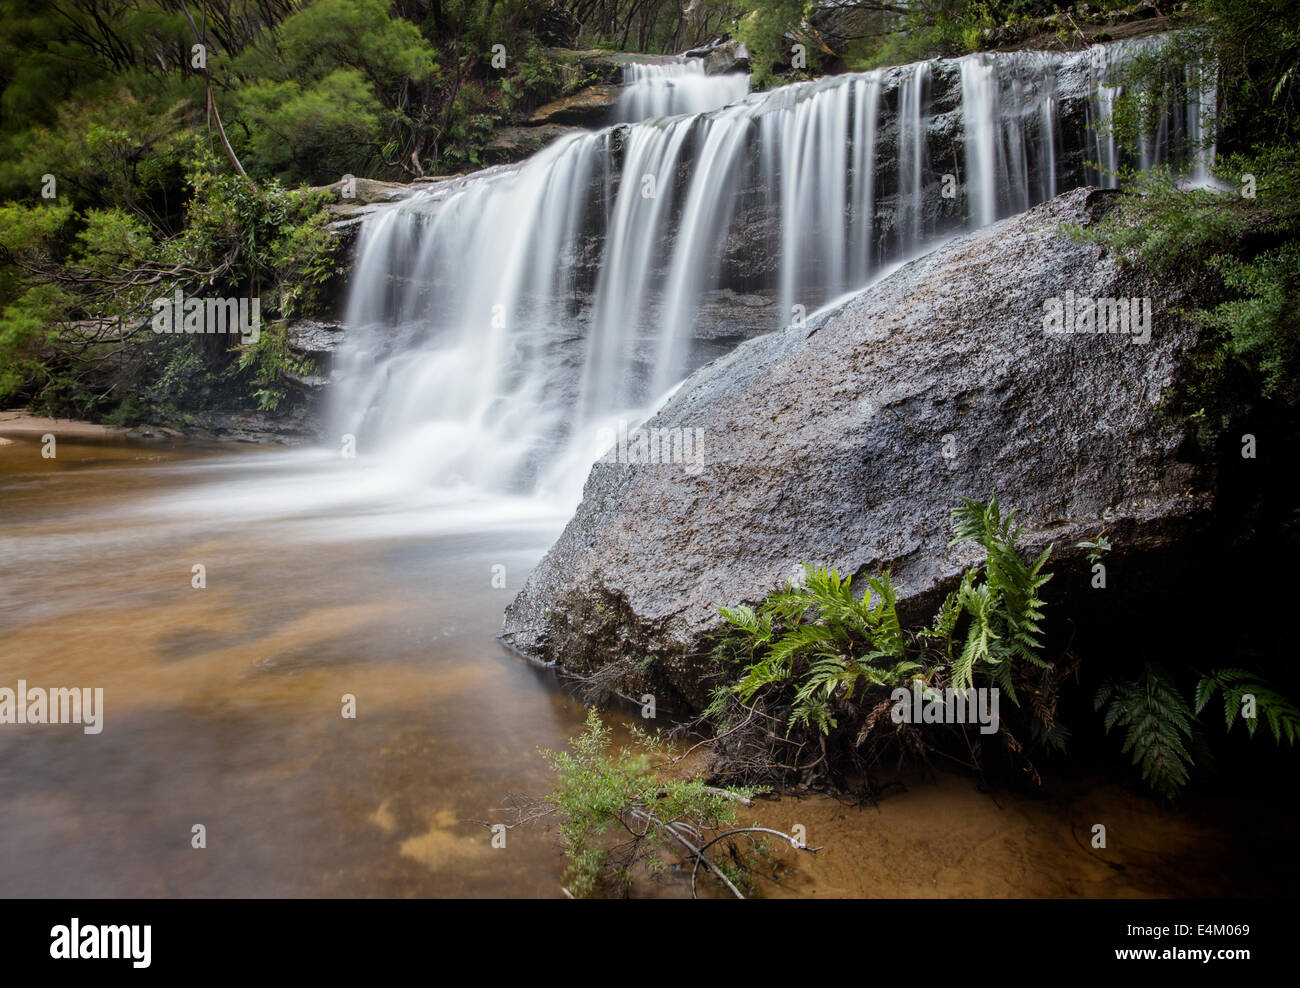 A long exposure of waterfalls, taken at Wentworth Falls in the Blue Mountains, near Sydney Australia Stock Photo